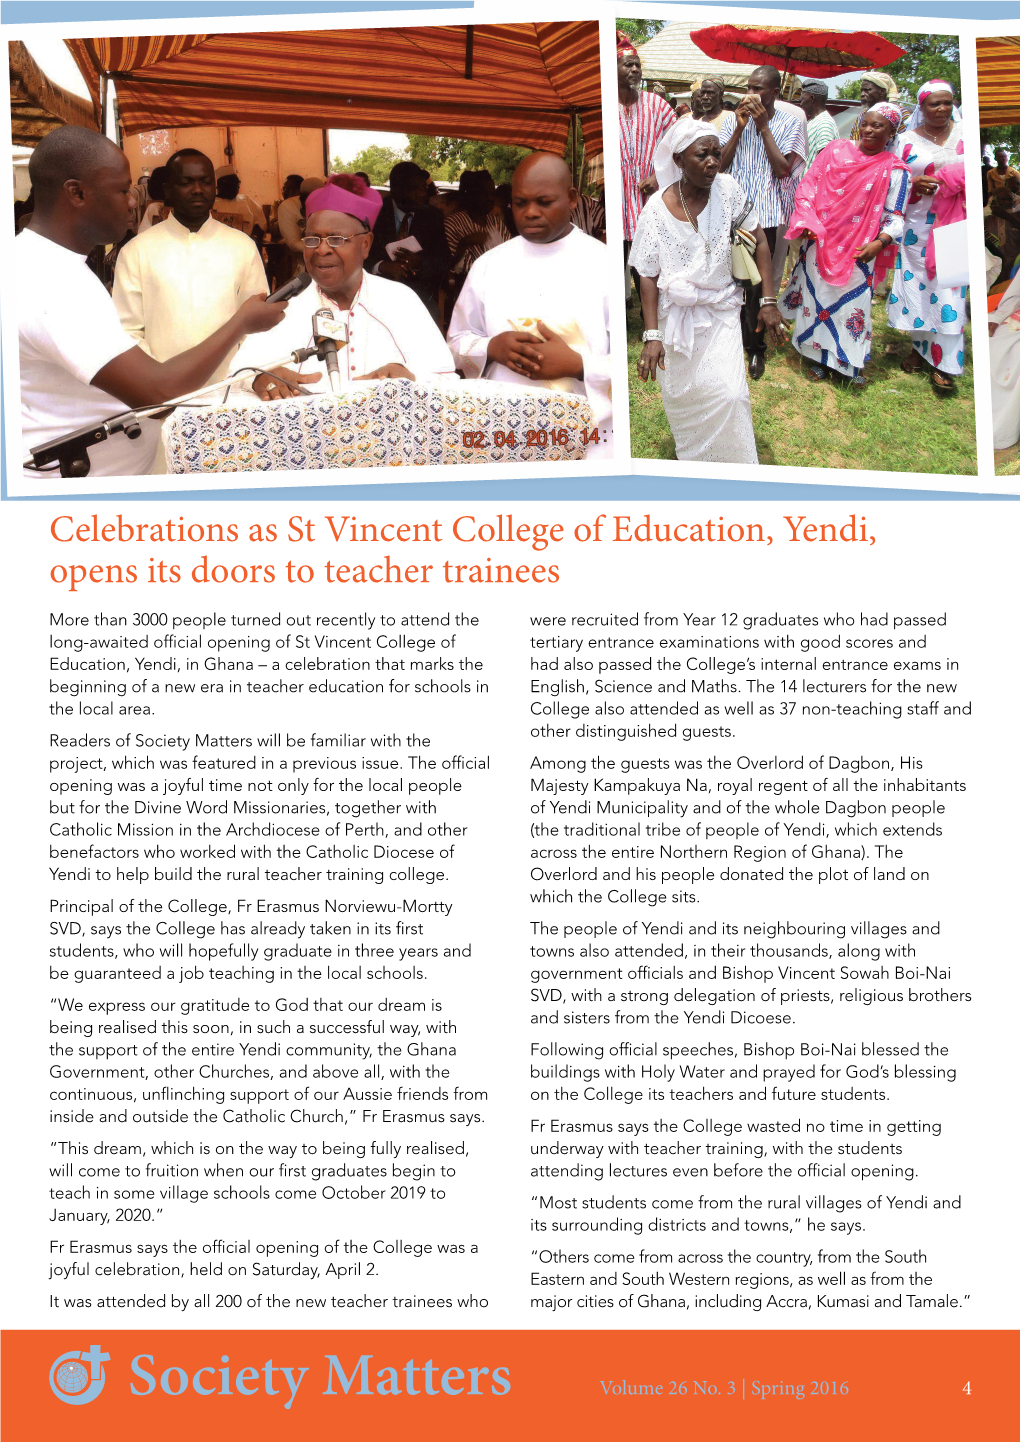 Celebrations As St Vincent College of Education, Yendi, Opens Its Doors To